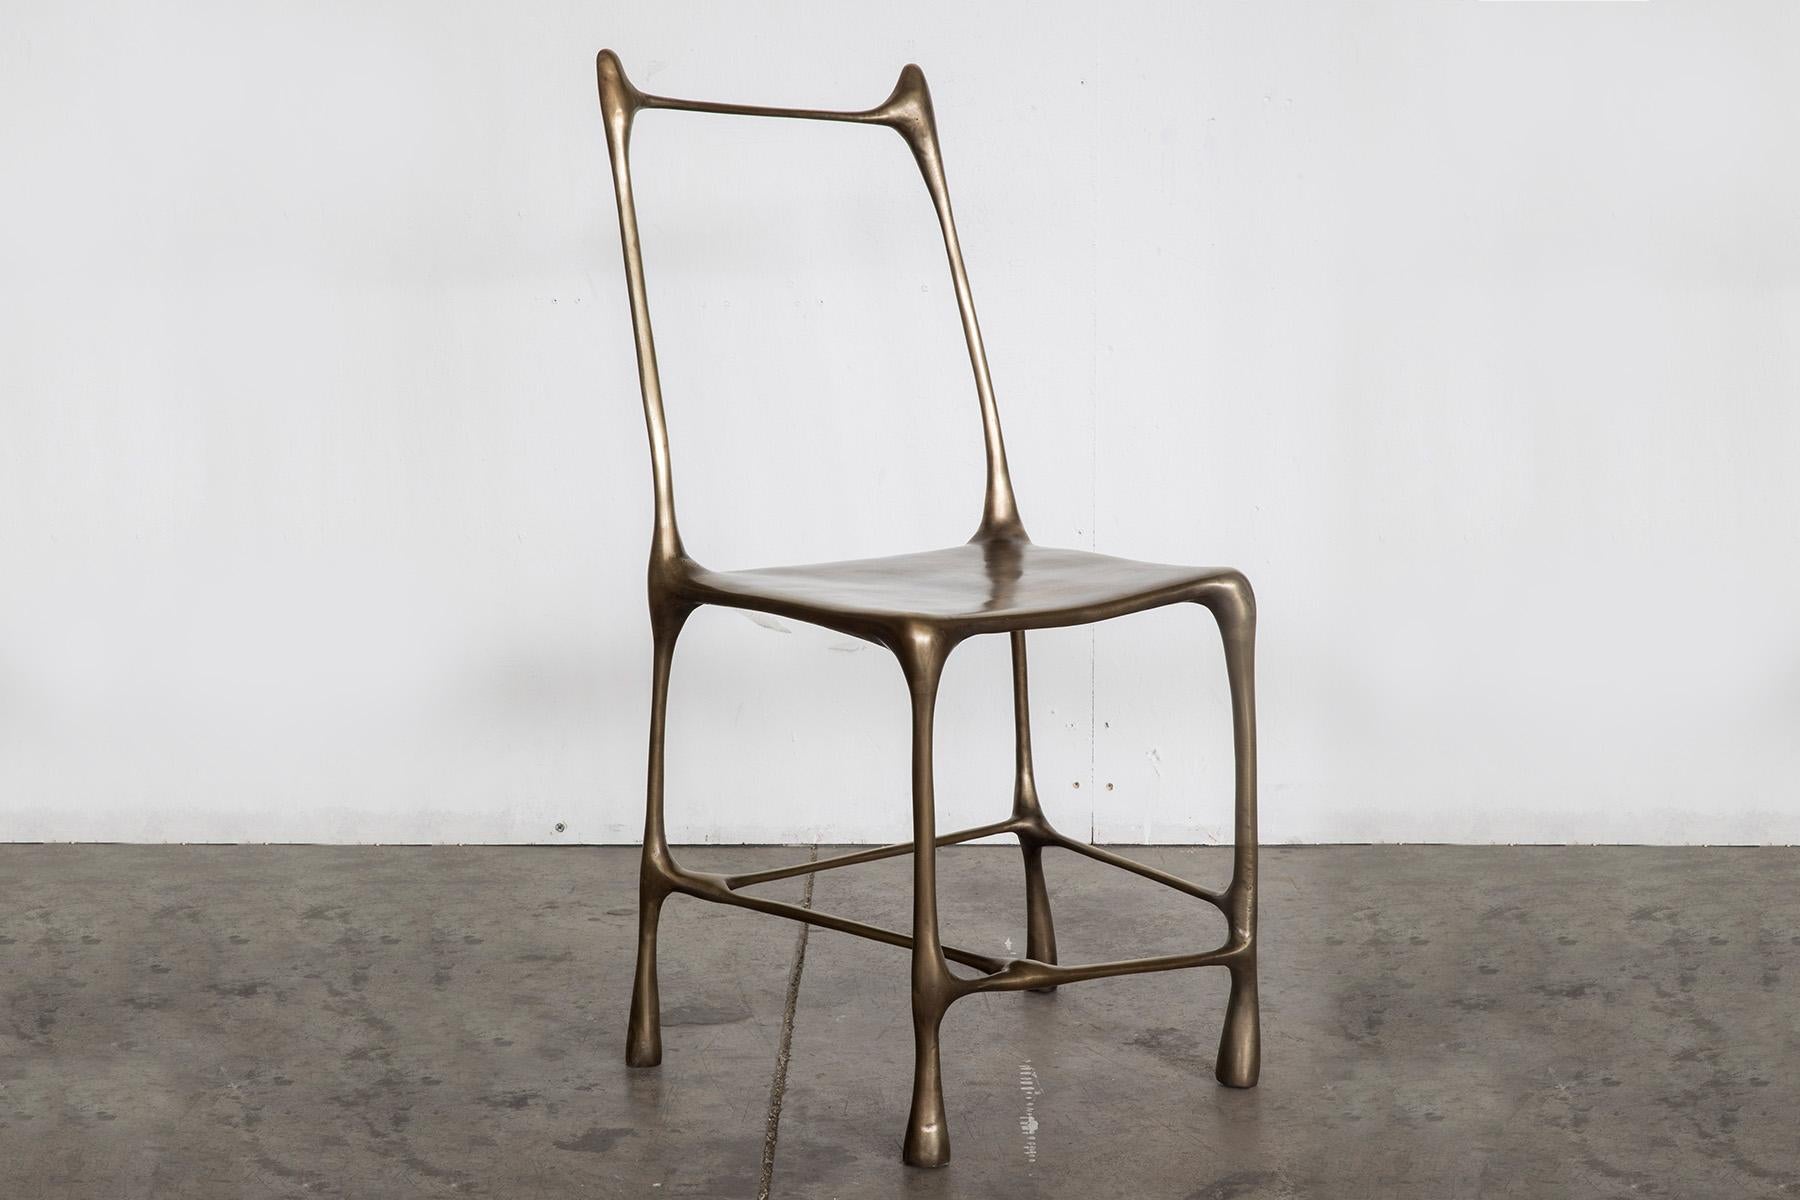 This artwork is for both internal and external environment. Shaped bronze chair streamlined and refined, inspired to natural elements. The dimensions are approx. The materials are worked by twisting the original shape of the object, converting in an